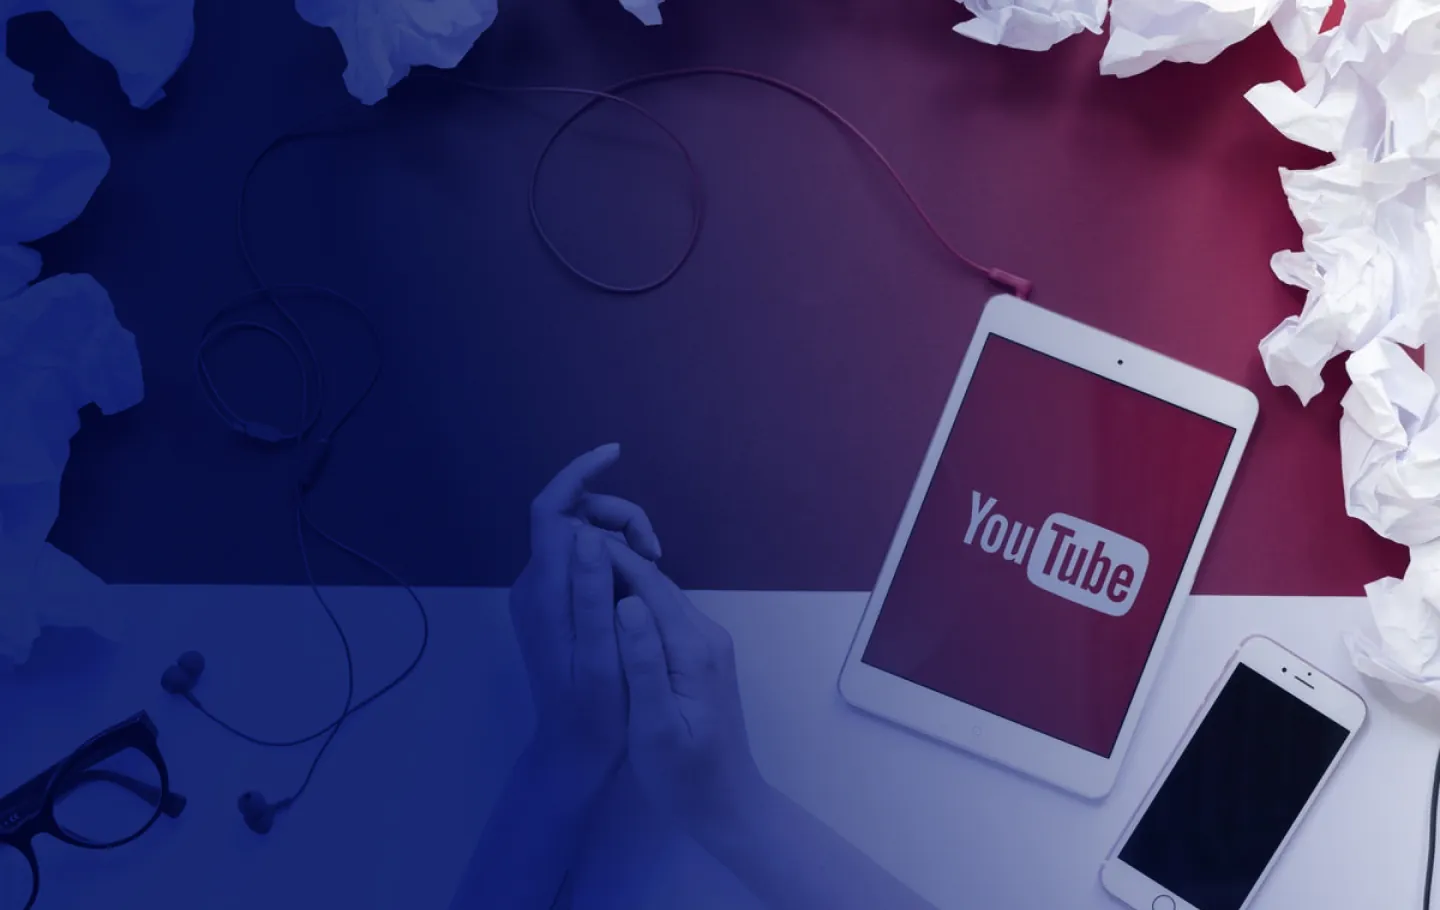 A person's hands on a table, an Ipad on the right side with YouTube logo on it